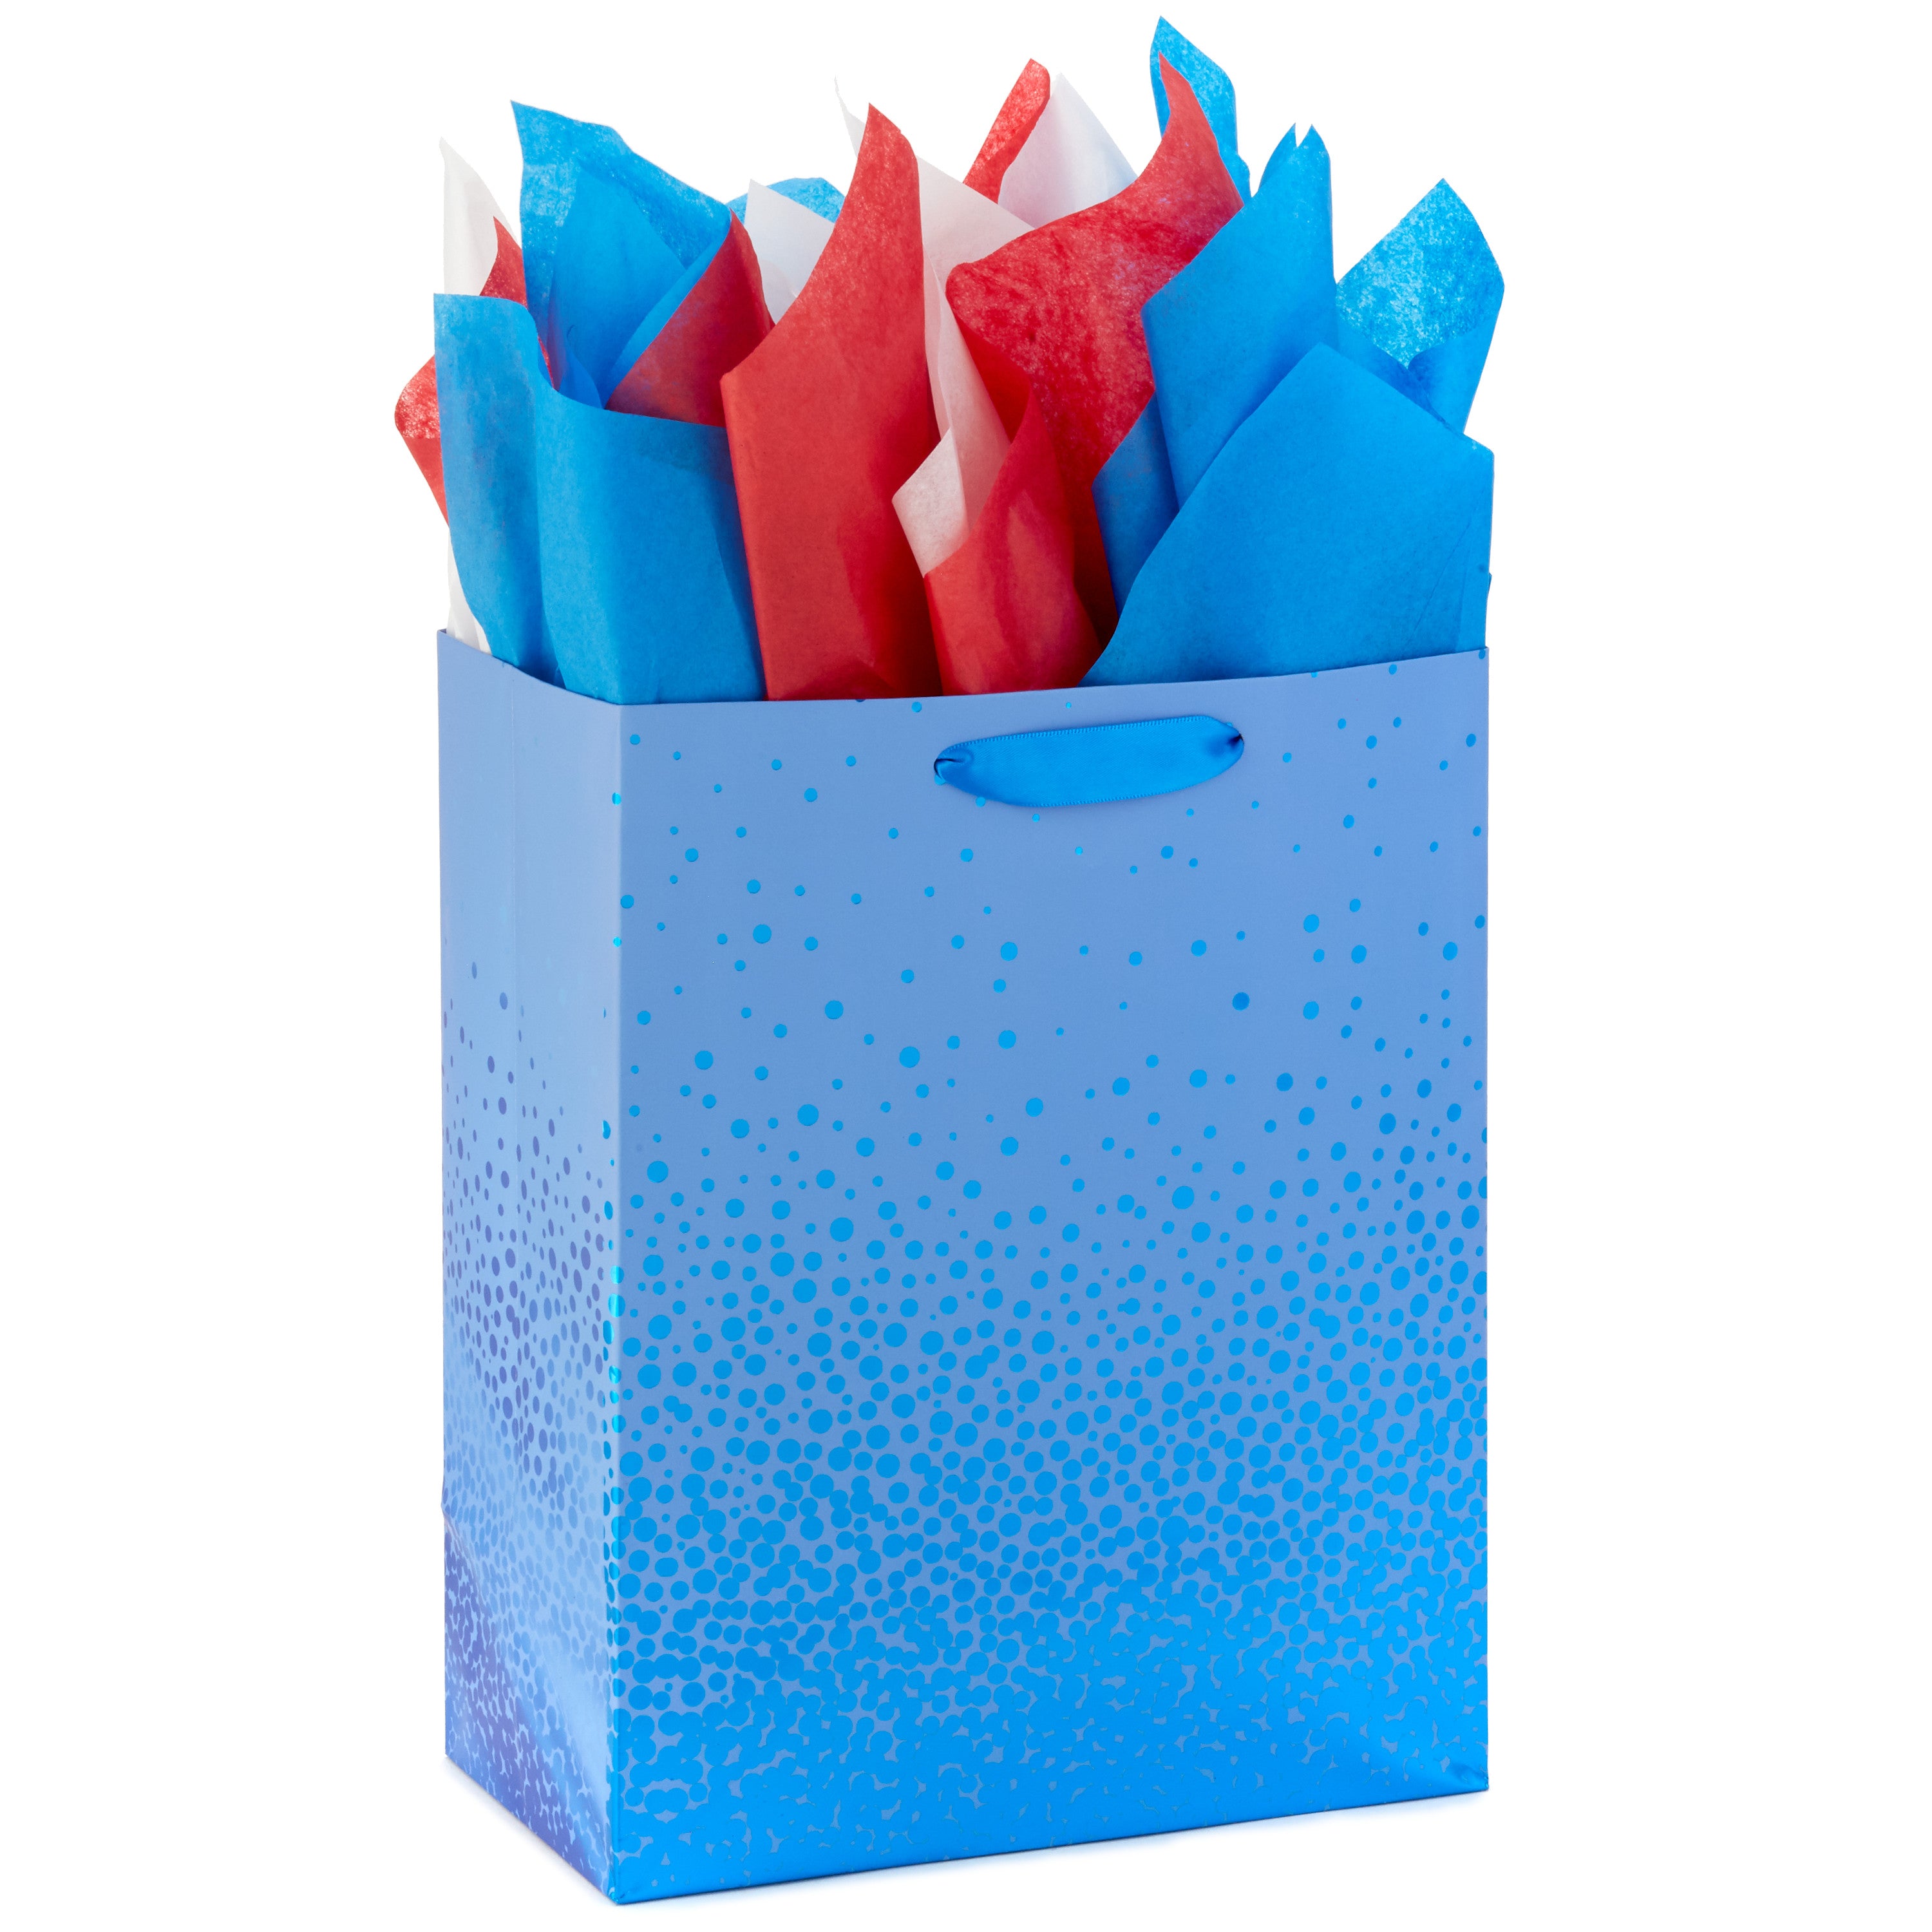 Red, White and Blue Bulk Tissue Paper (120 Sheets) for Gift Bags, Birthdays, Graduations, Fourth of July, Christmas, Hanukkah